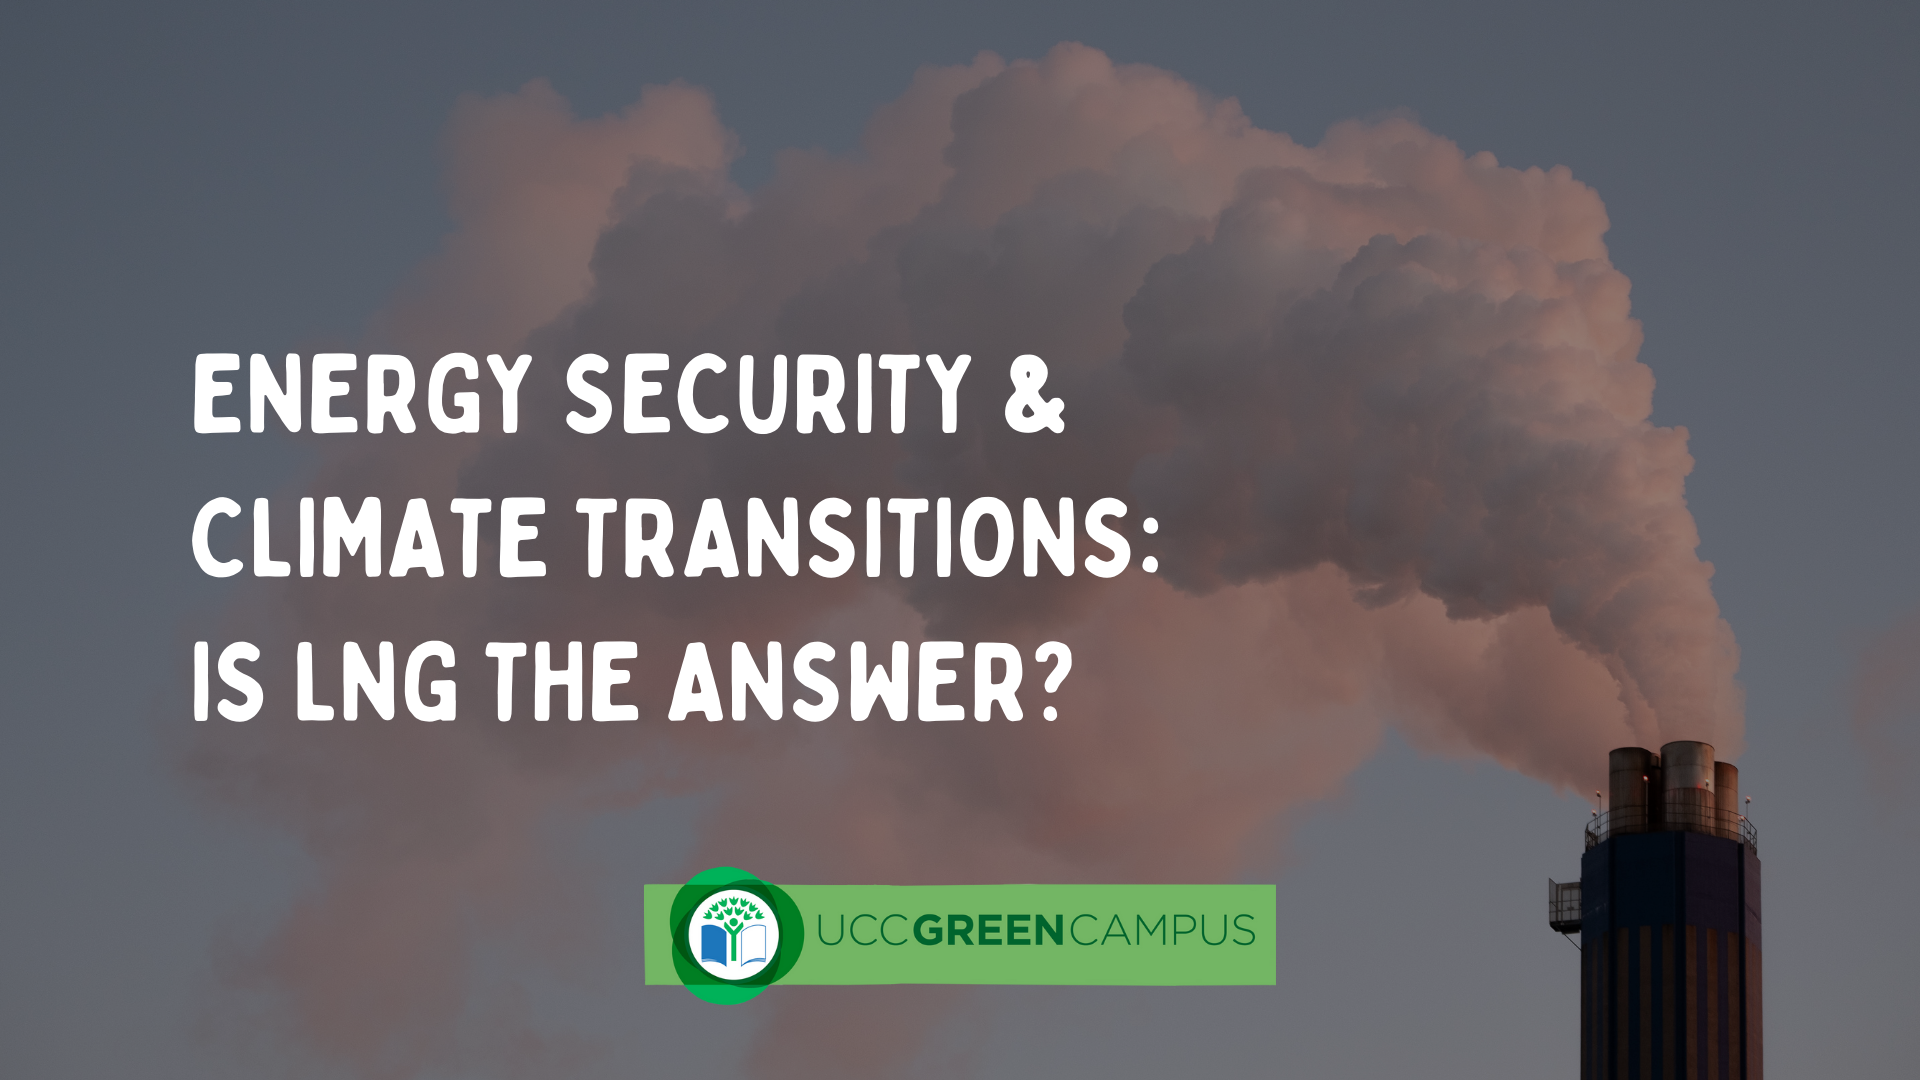 Energy Security & Climate Transitions: Is LNG The Answer? 
                                  